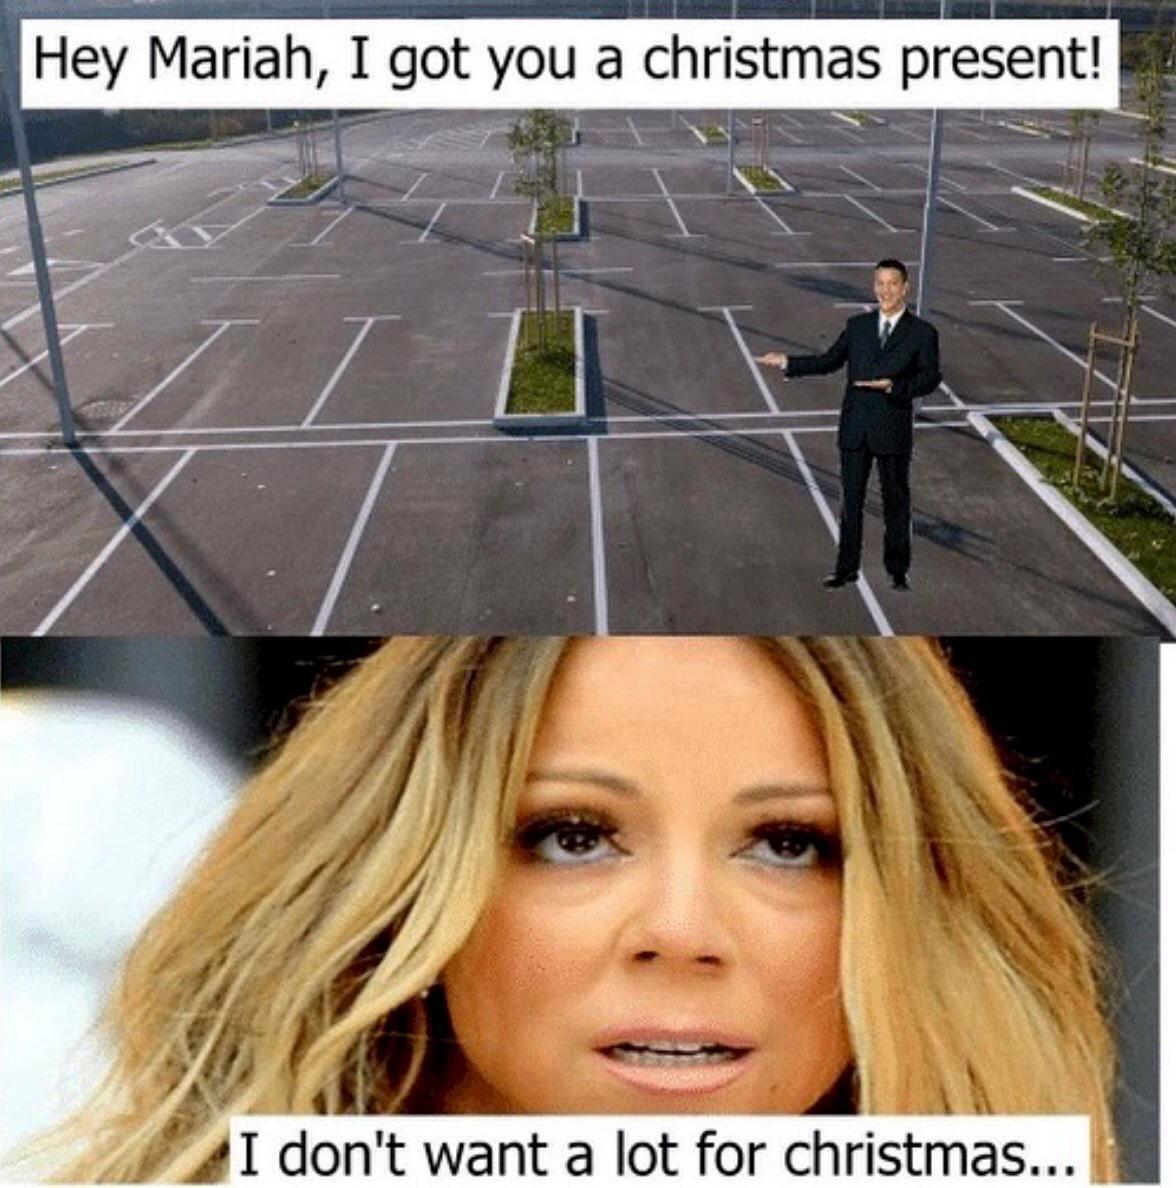 don t want a lot for christmas meme - Hey Mariah, I got you a christmas present! I don't want a lot for christmas...